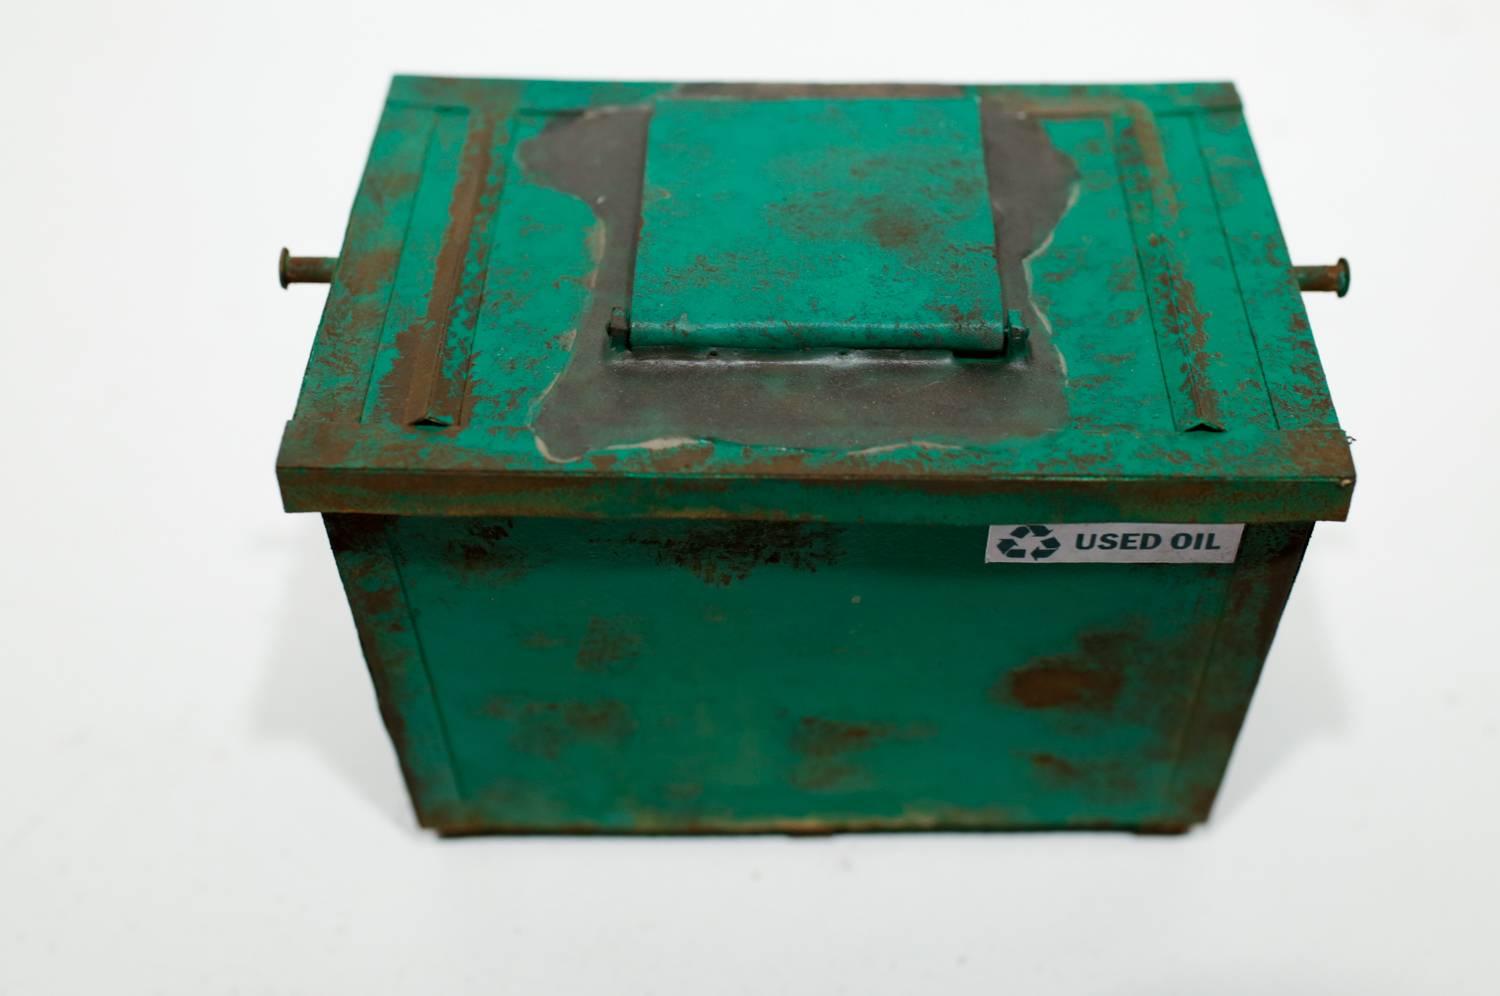 Used Cooking Oil Dumpster - Contemporary Sculpture by Drew Leshko